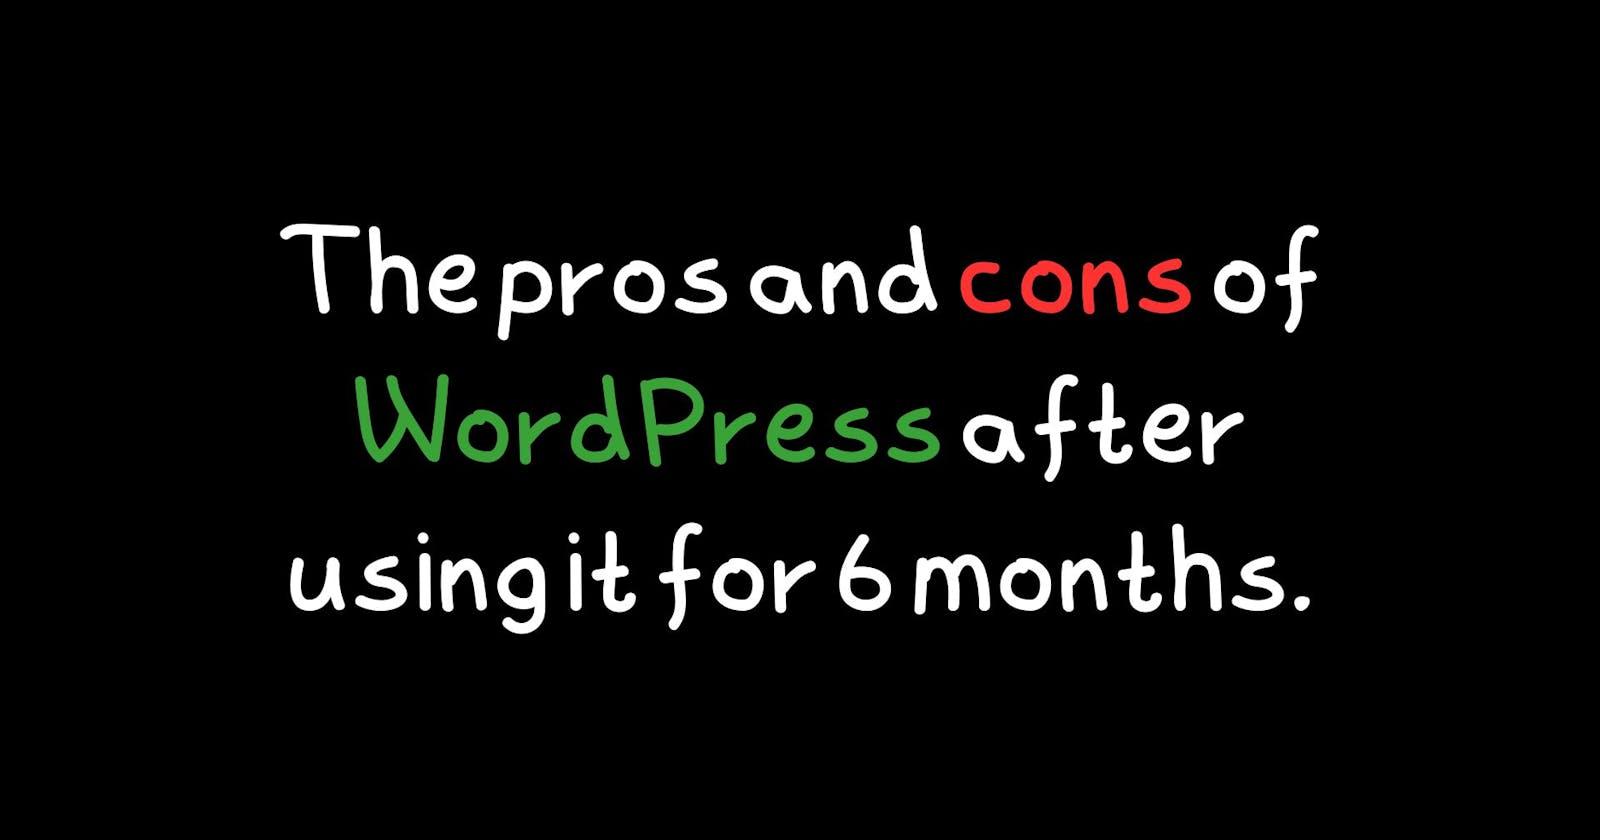 The pros and cons of WordPress after using it for 6 months.